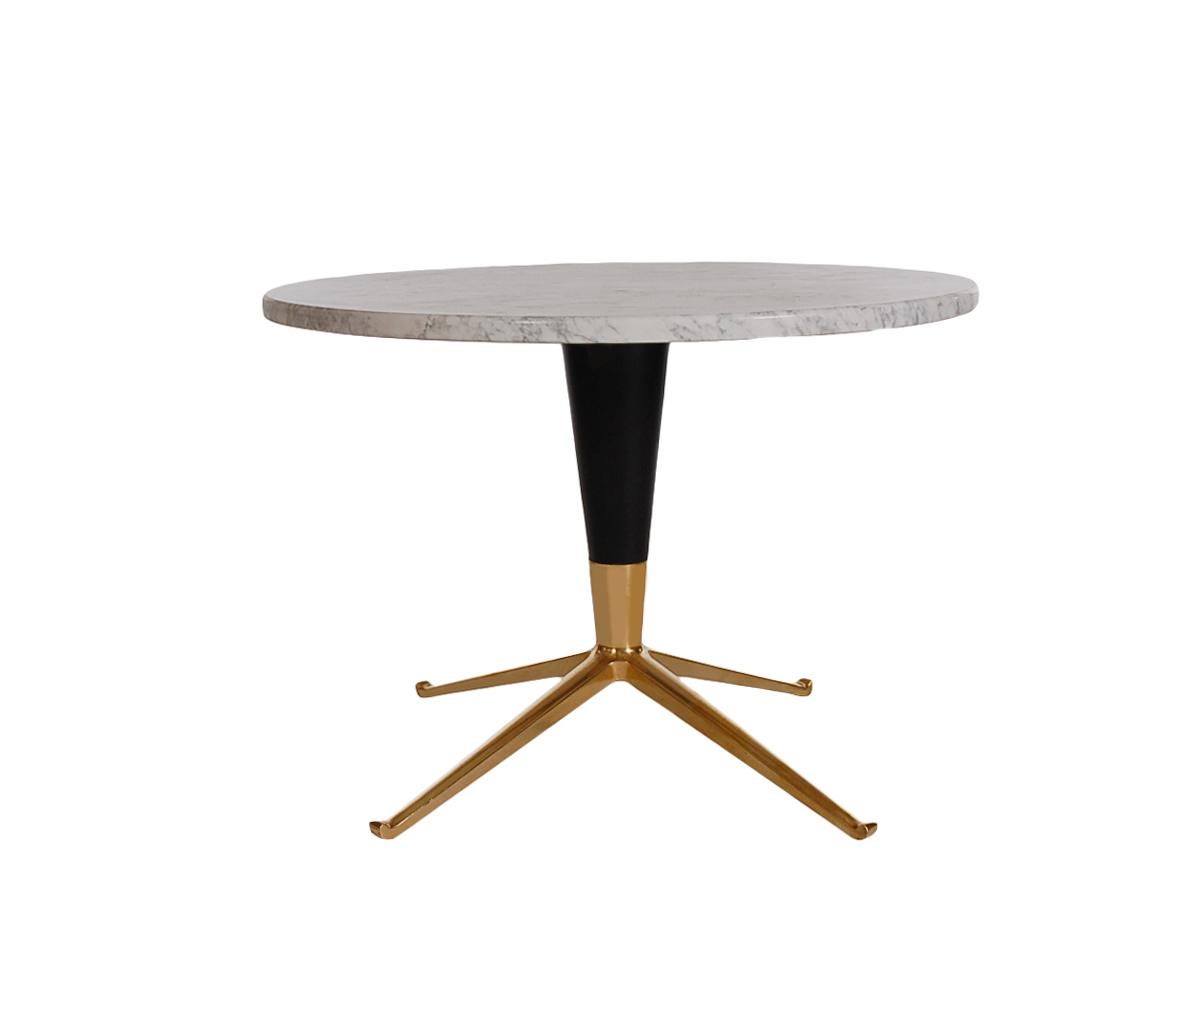 Mid-20th Century Mid-Century Modern Italian Brass & Marble Side Table after Ico Parisi